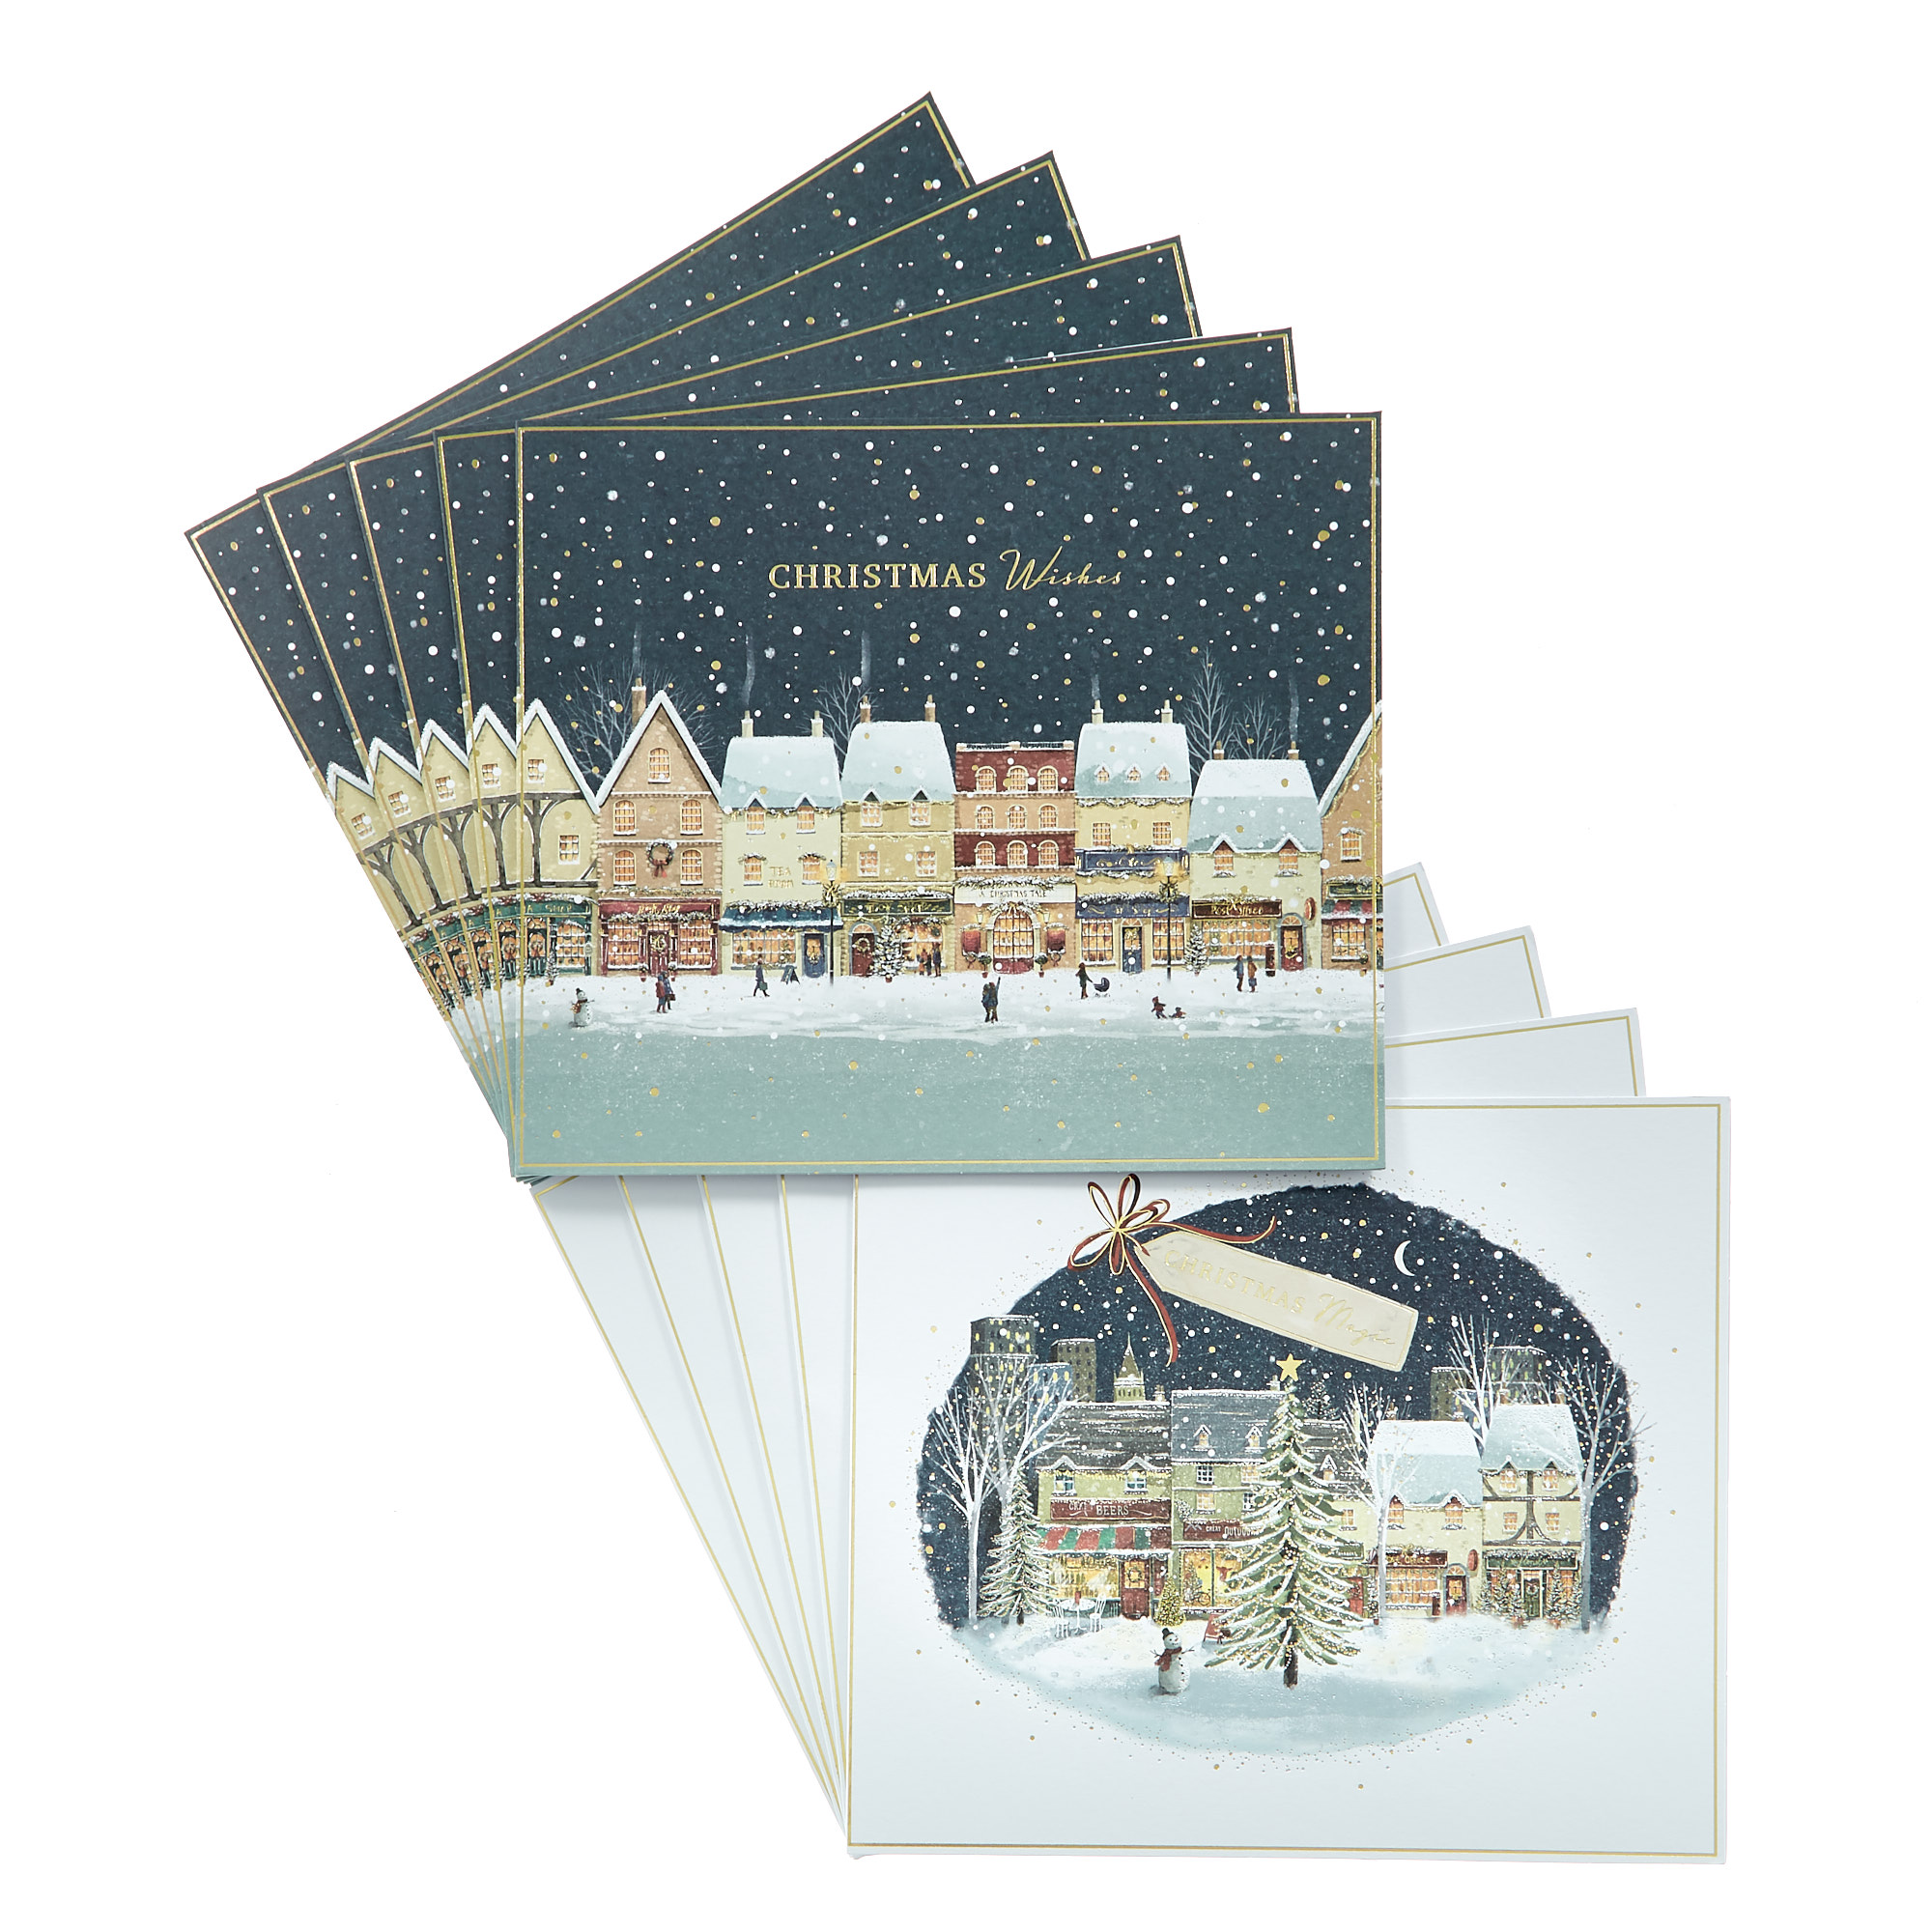 Box of 12 Deluxe Village Scene Charity Christmas Cards - 2 Designs